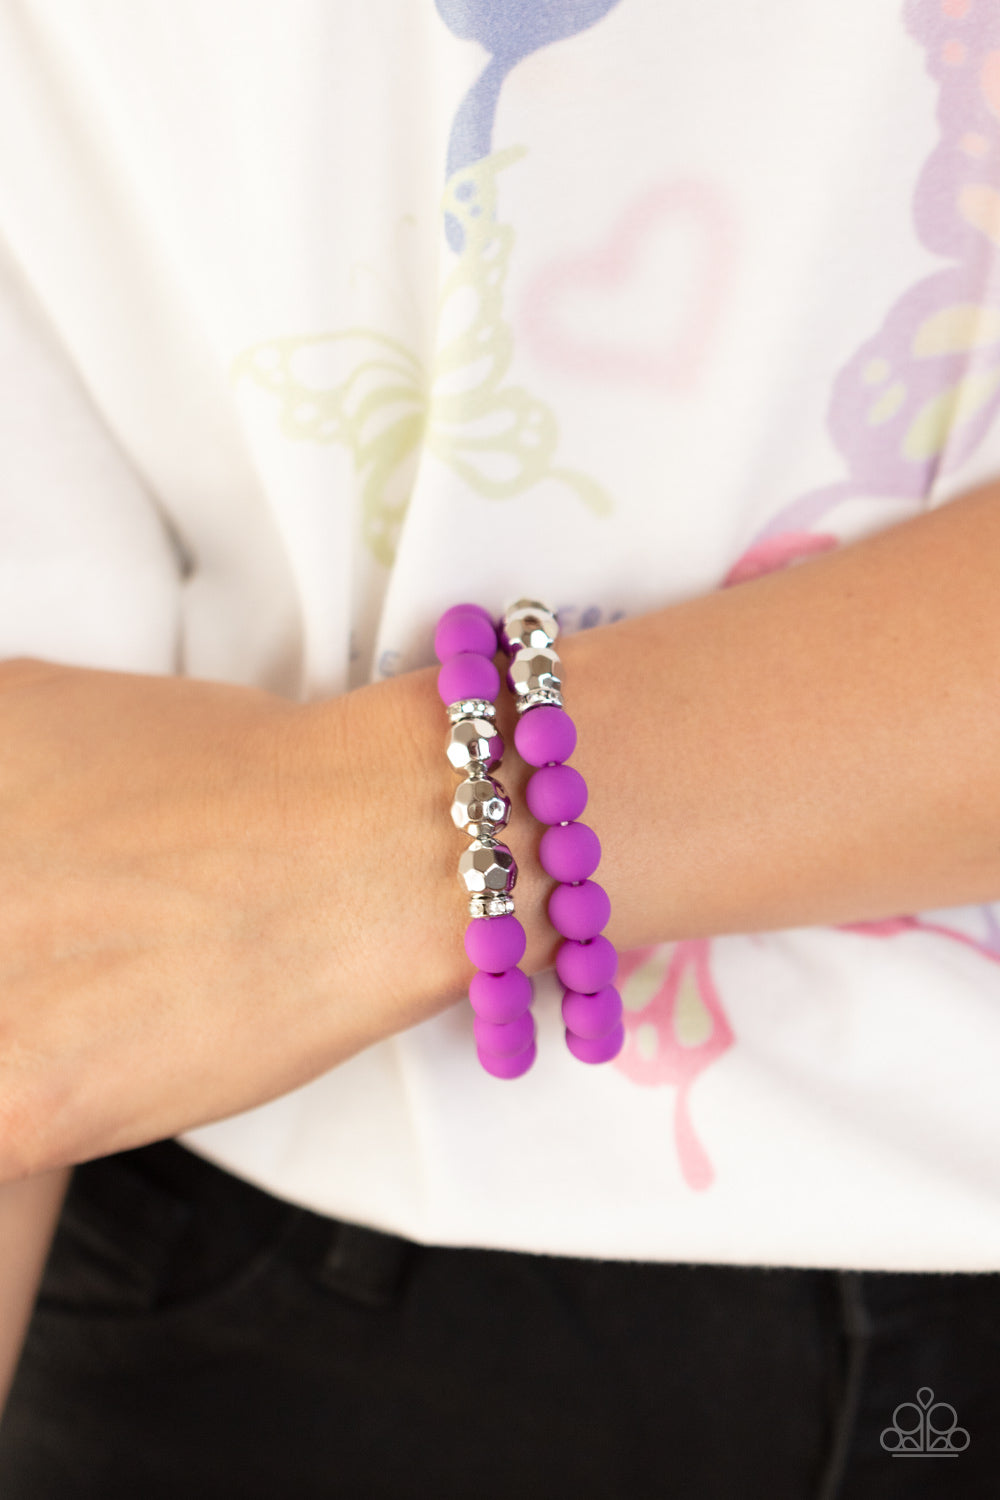 Paparazzi Accessories Dip and Dive - Purple White rhinestone encrusted rings flank a trio of faceted silver beads along a stretchy row of matte-finished Dahlia beads, creating a summery splash of color around the wrist. Sold as one pair of bracelets. Get